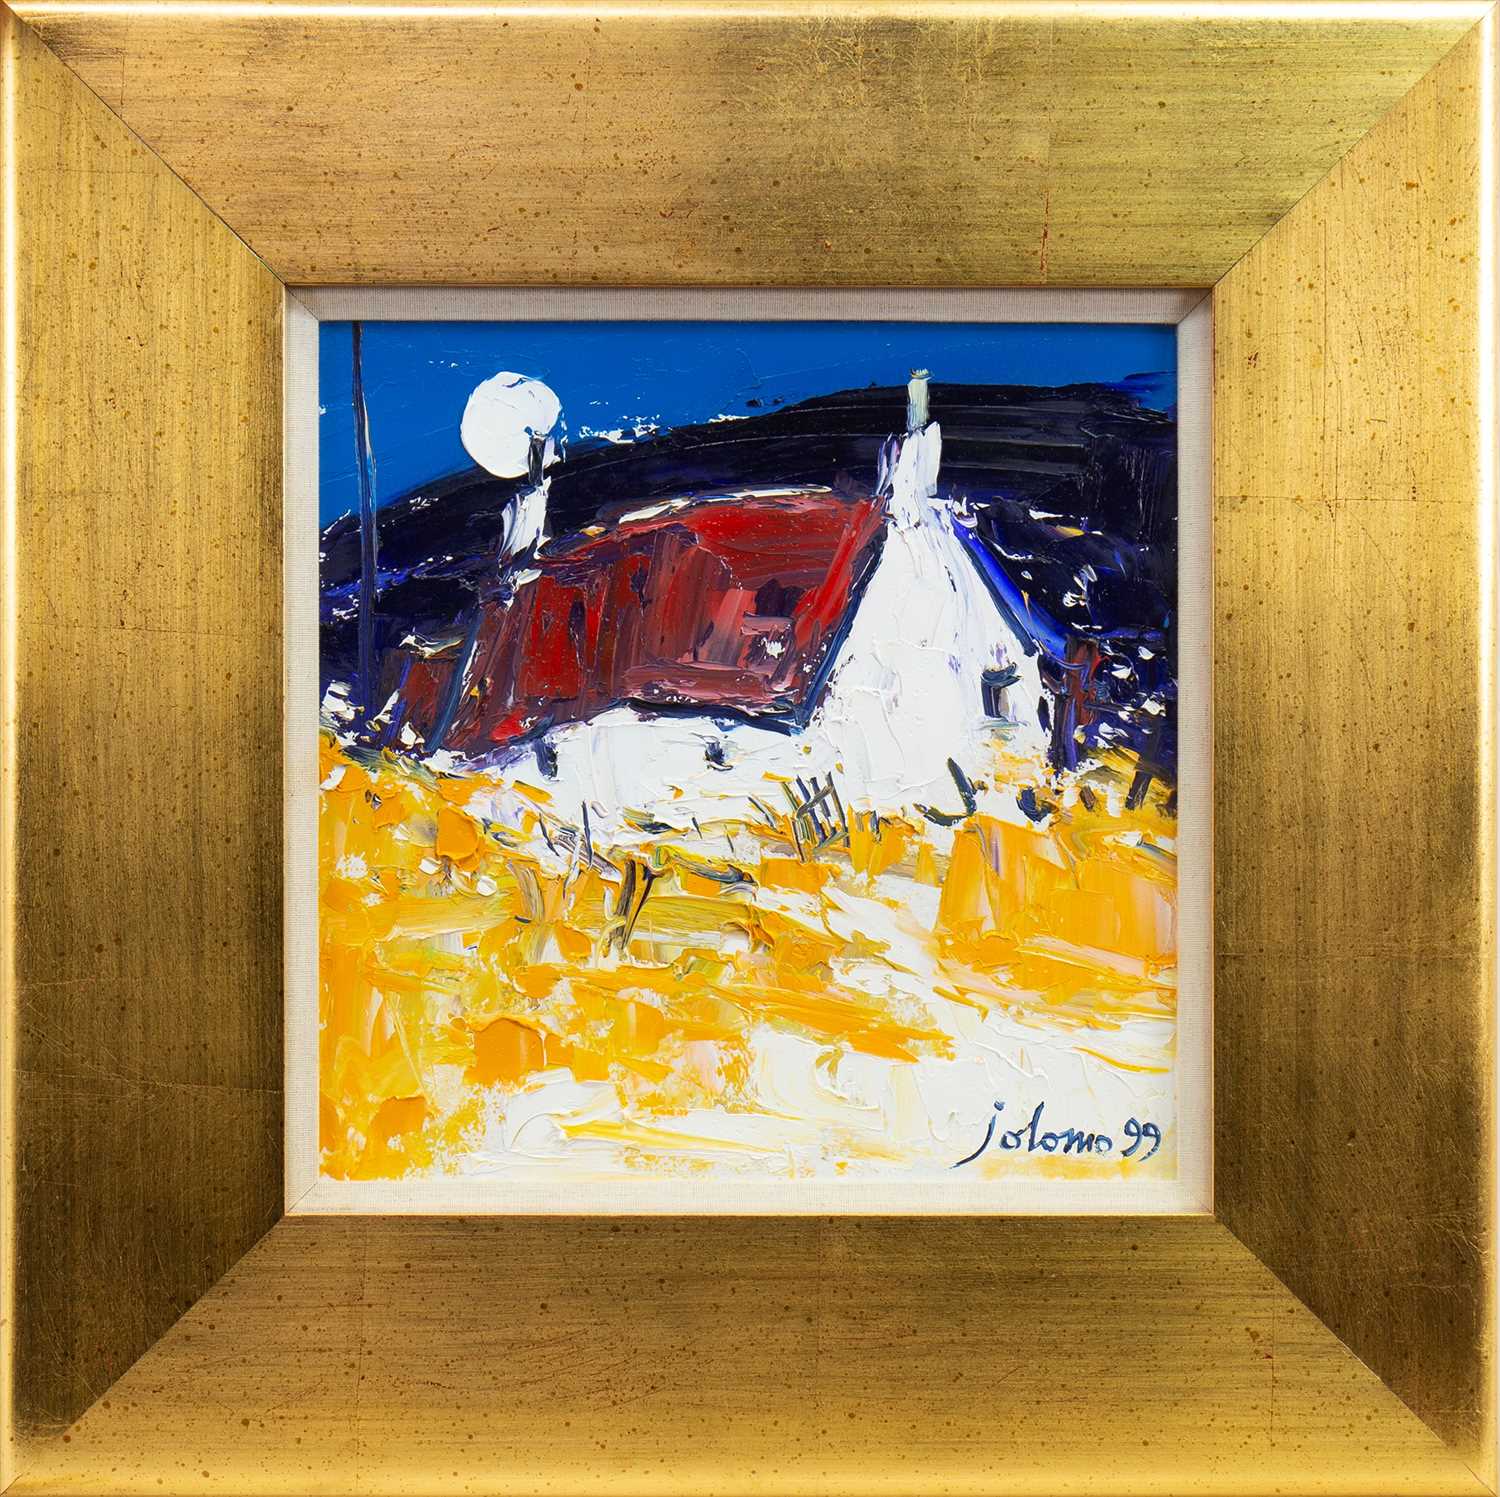 Lot 538 - MOON AND RED ROOF ARDNAMURCHAN, AN OIL BY JOLOMO